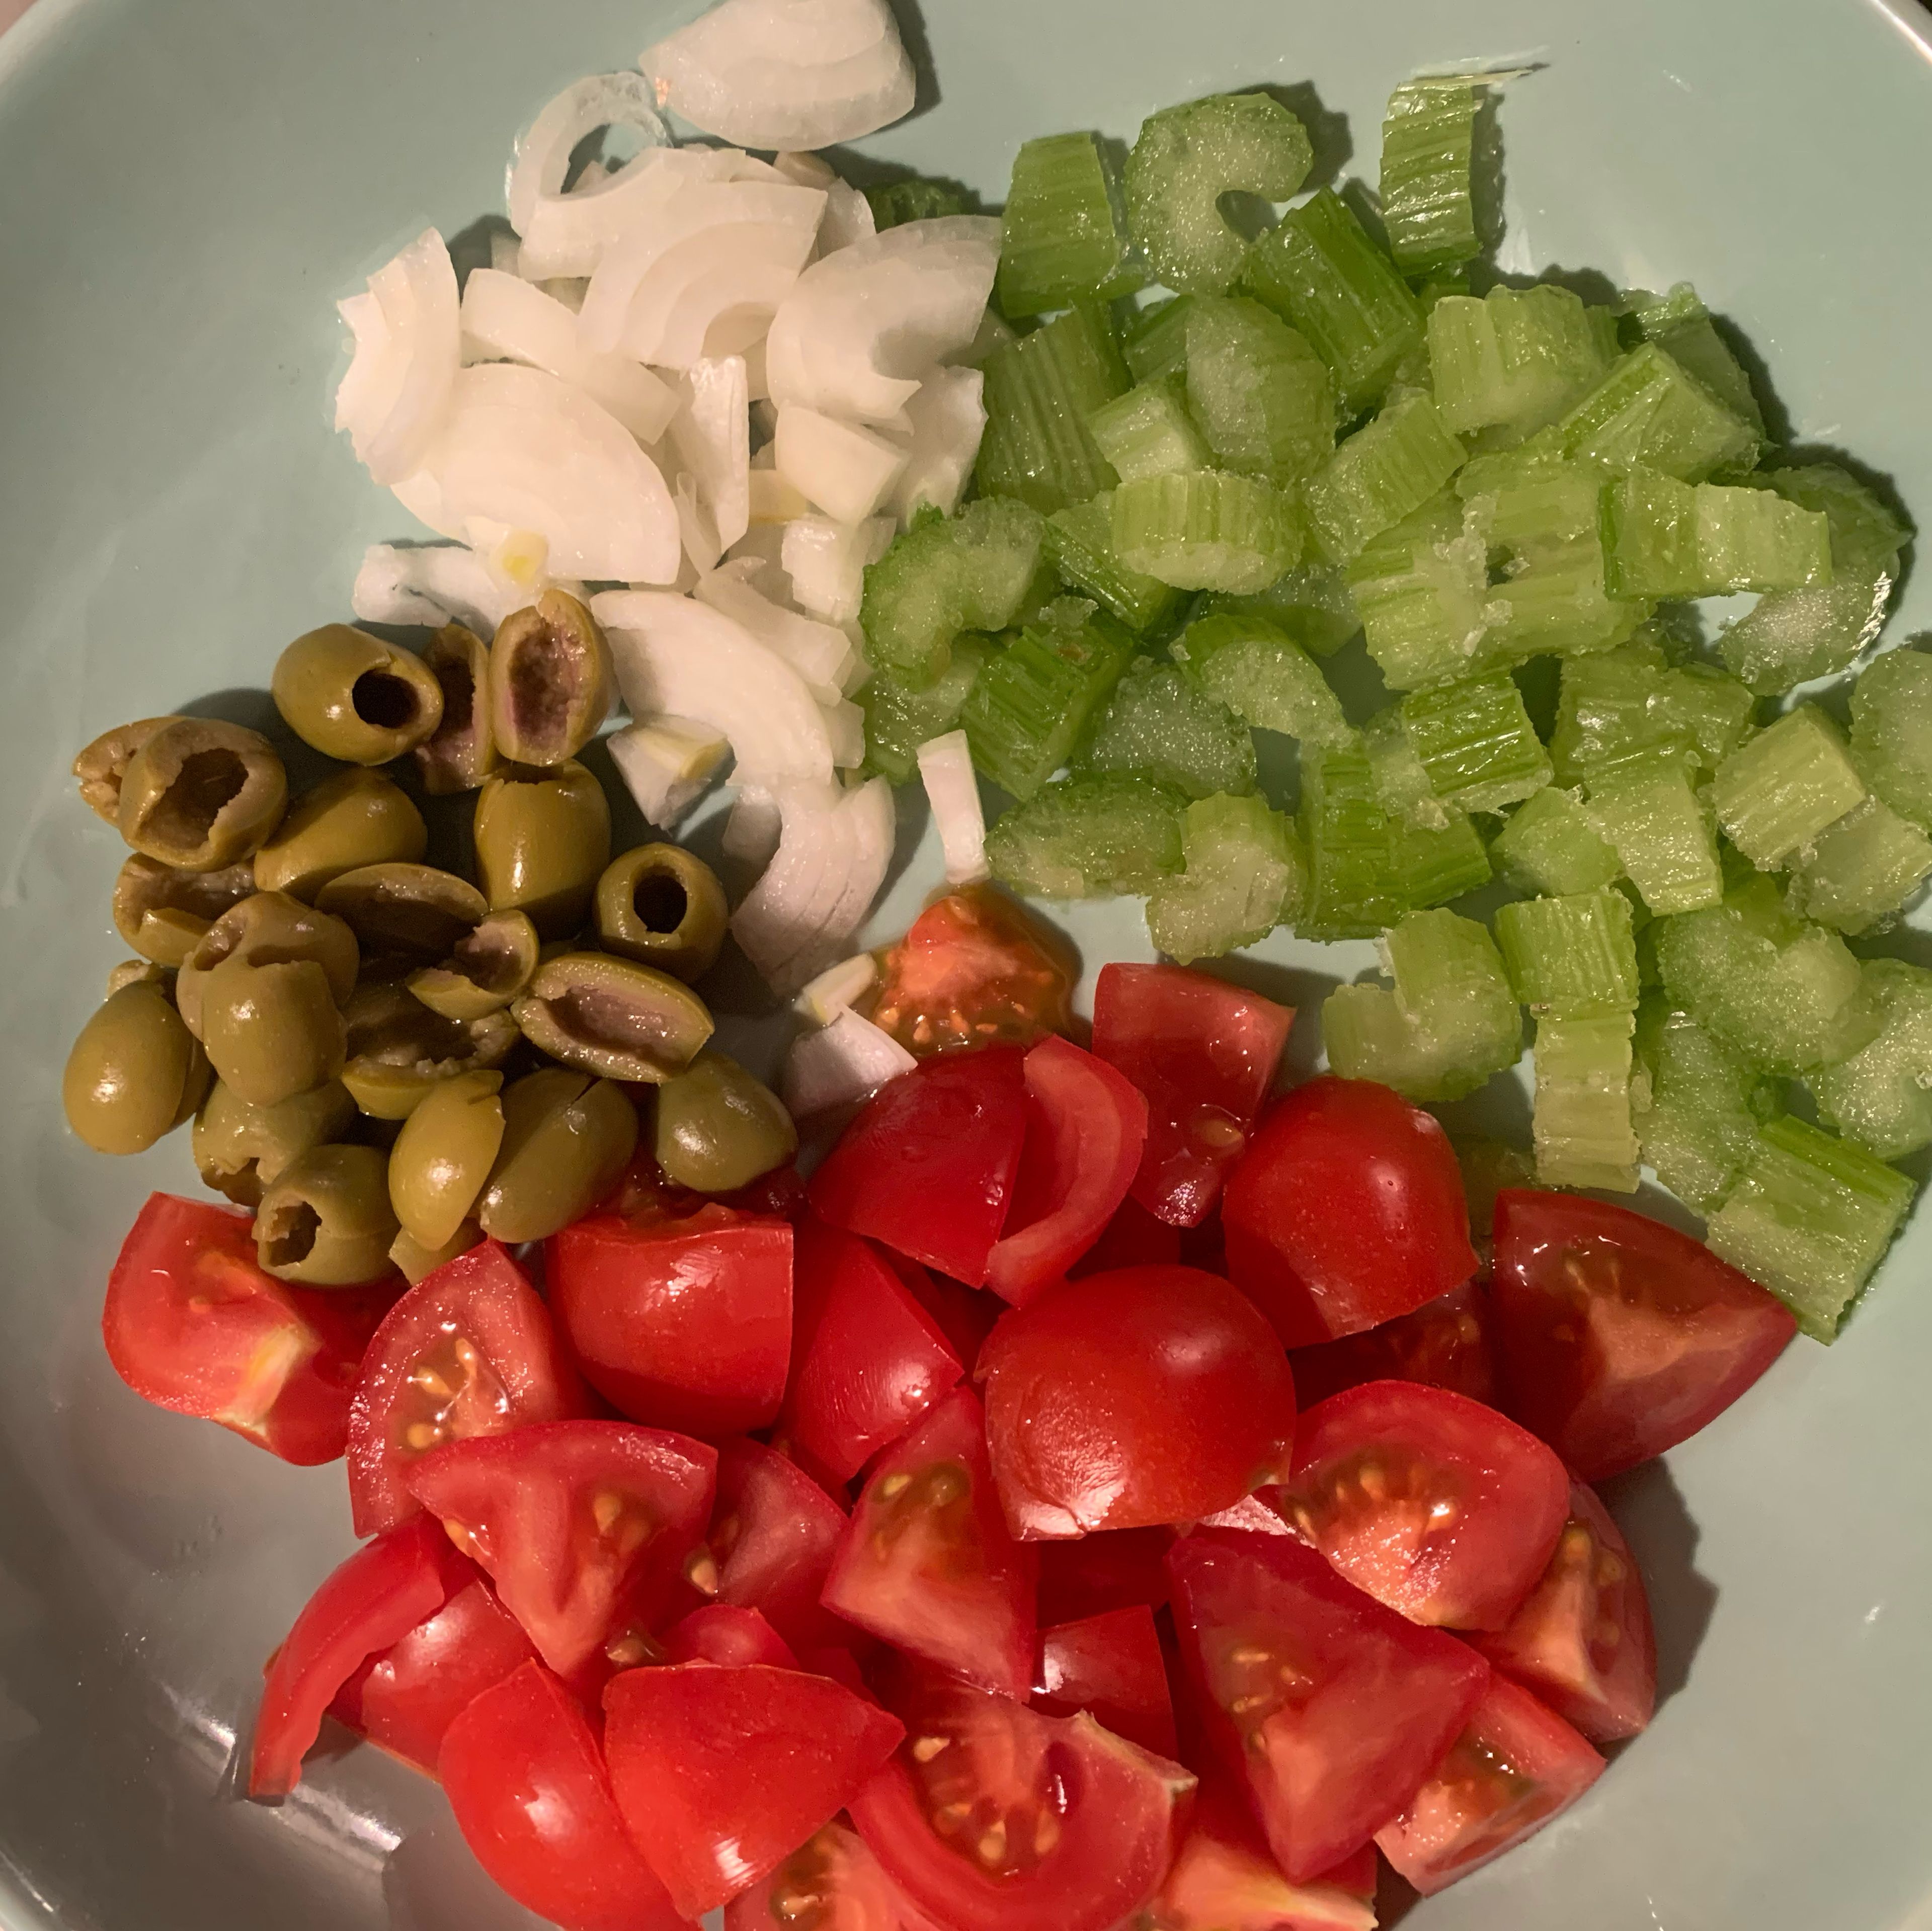 Cut the onion, tomatoes, celery and olives.